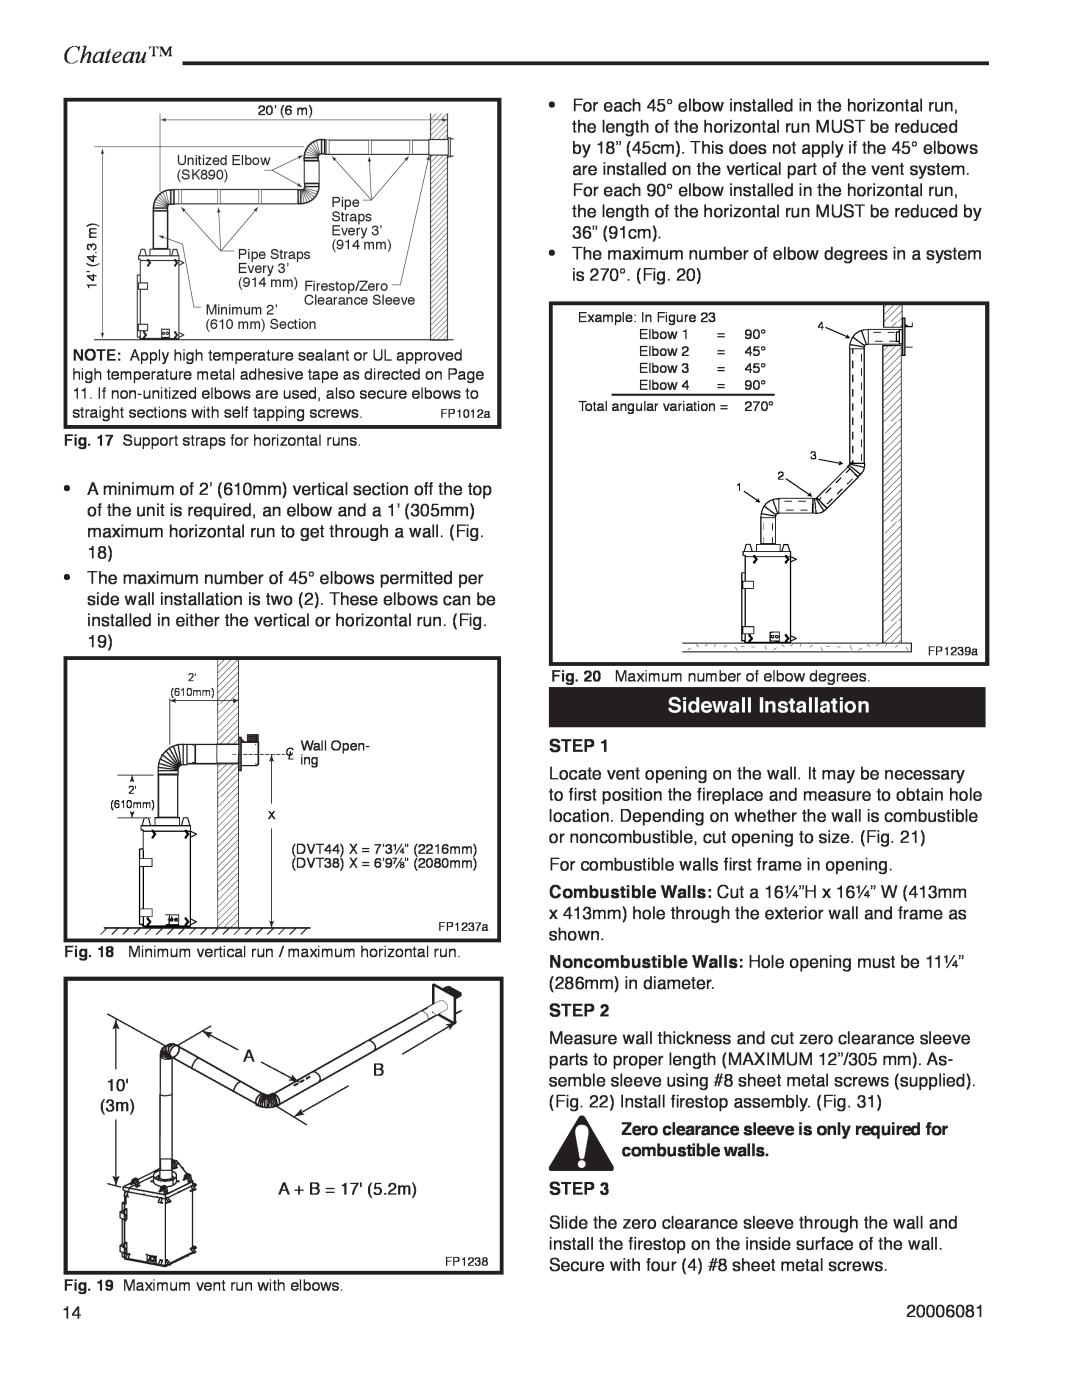 Vermont Casting DVT38 installation instructions Sidewall Installation, Chateau, Step 